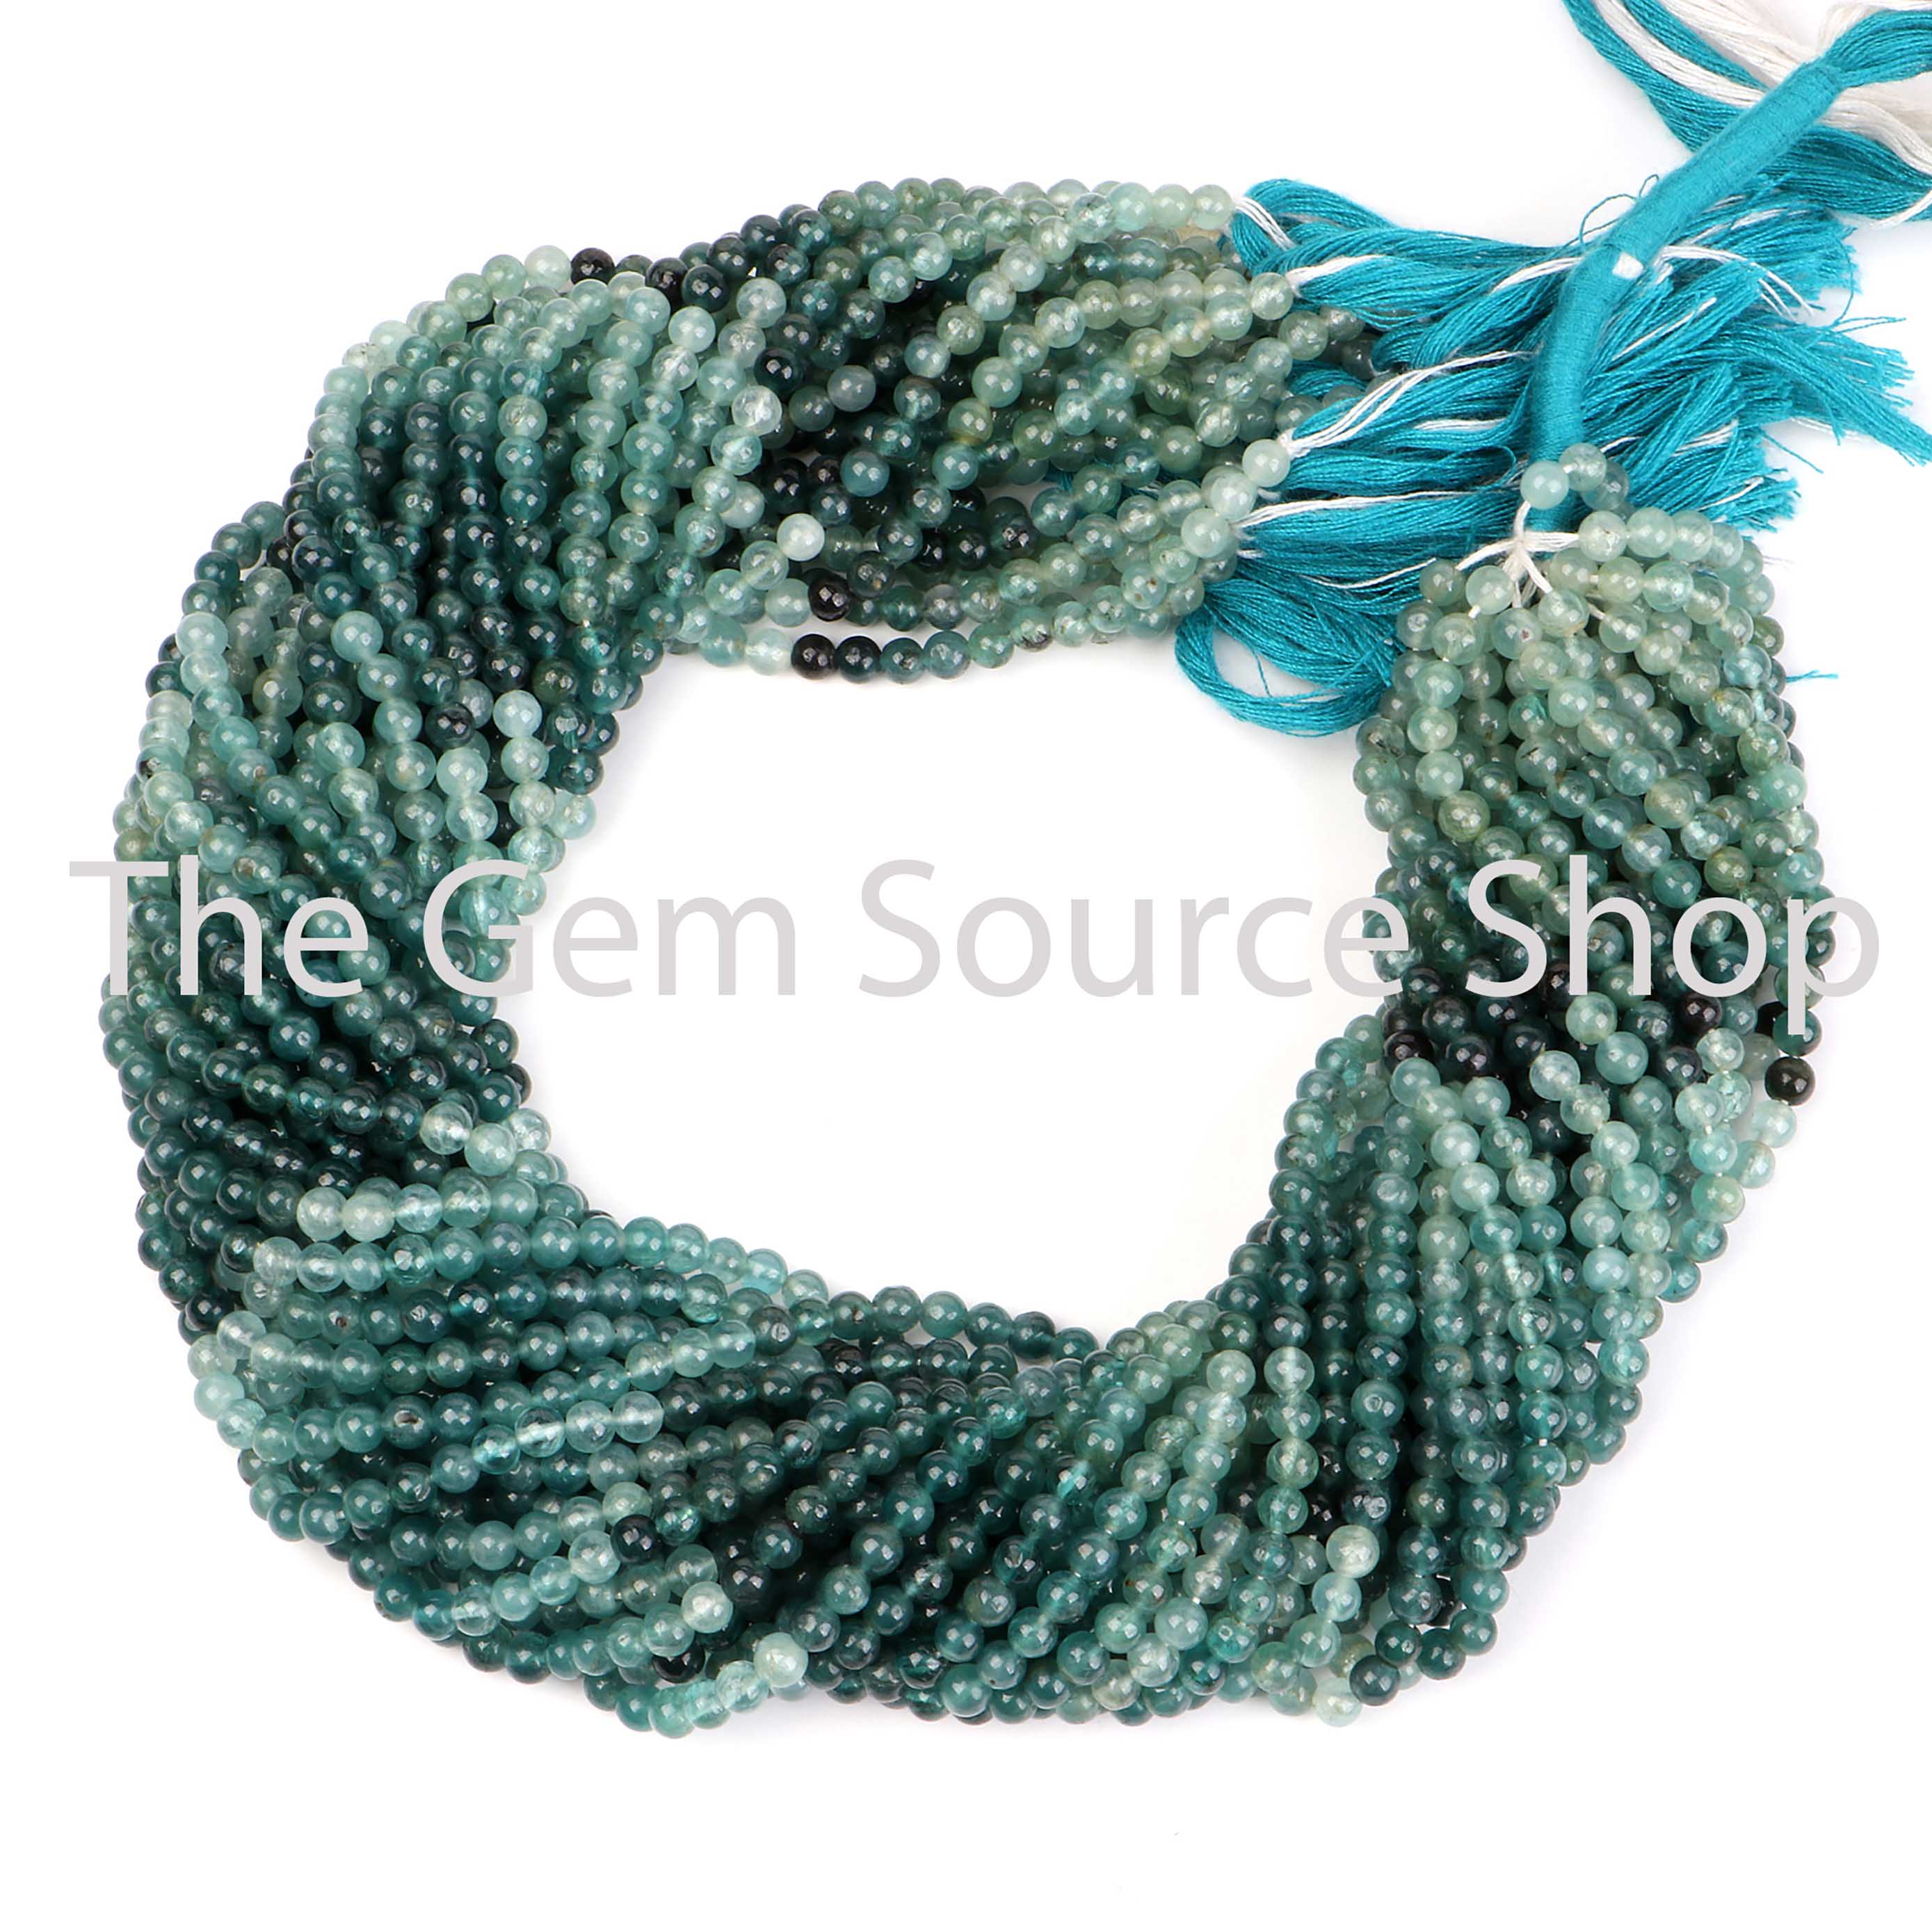 Wholesale Beads Supplies